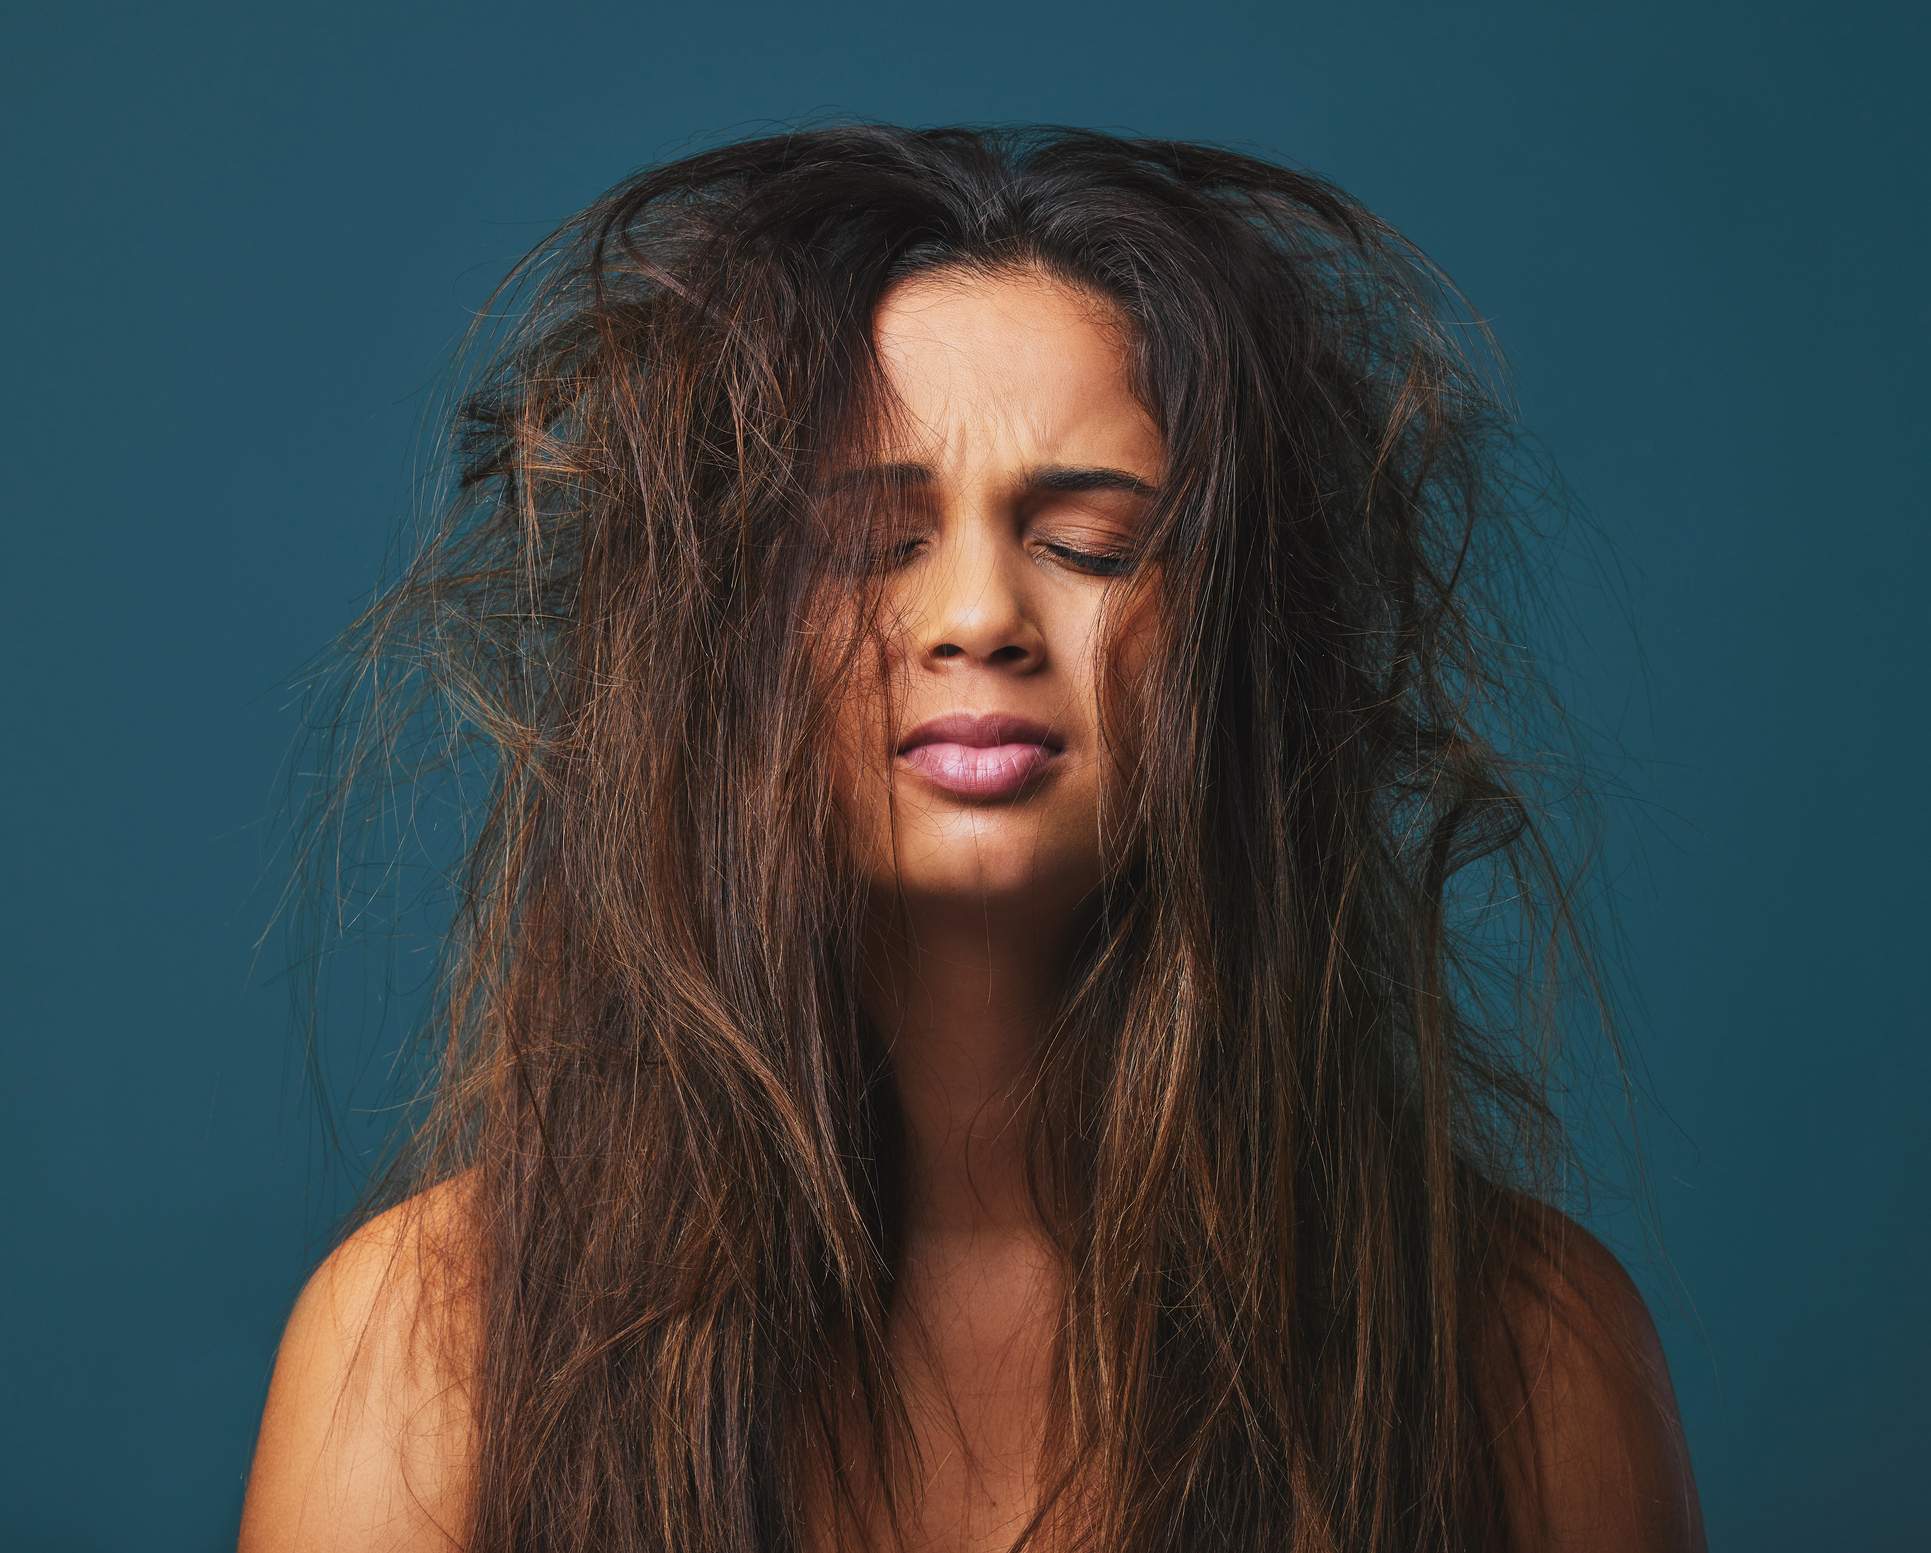 Studio shot of a beautiful young woman with messy hair posing against a blue background